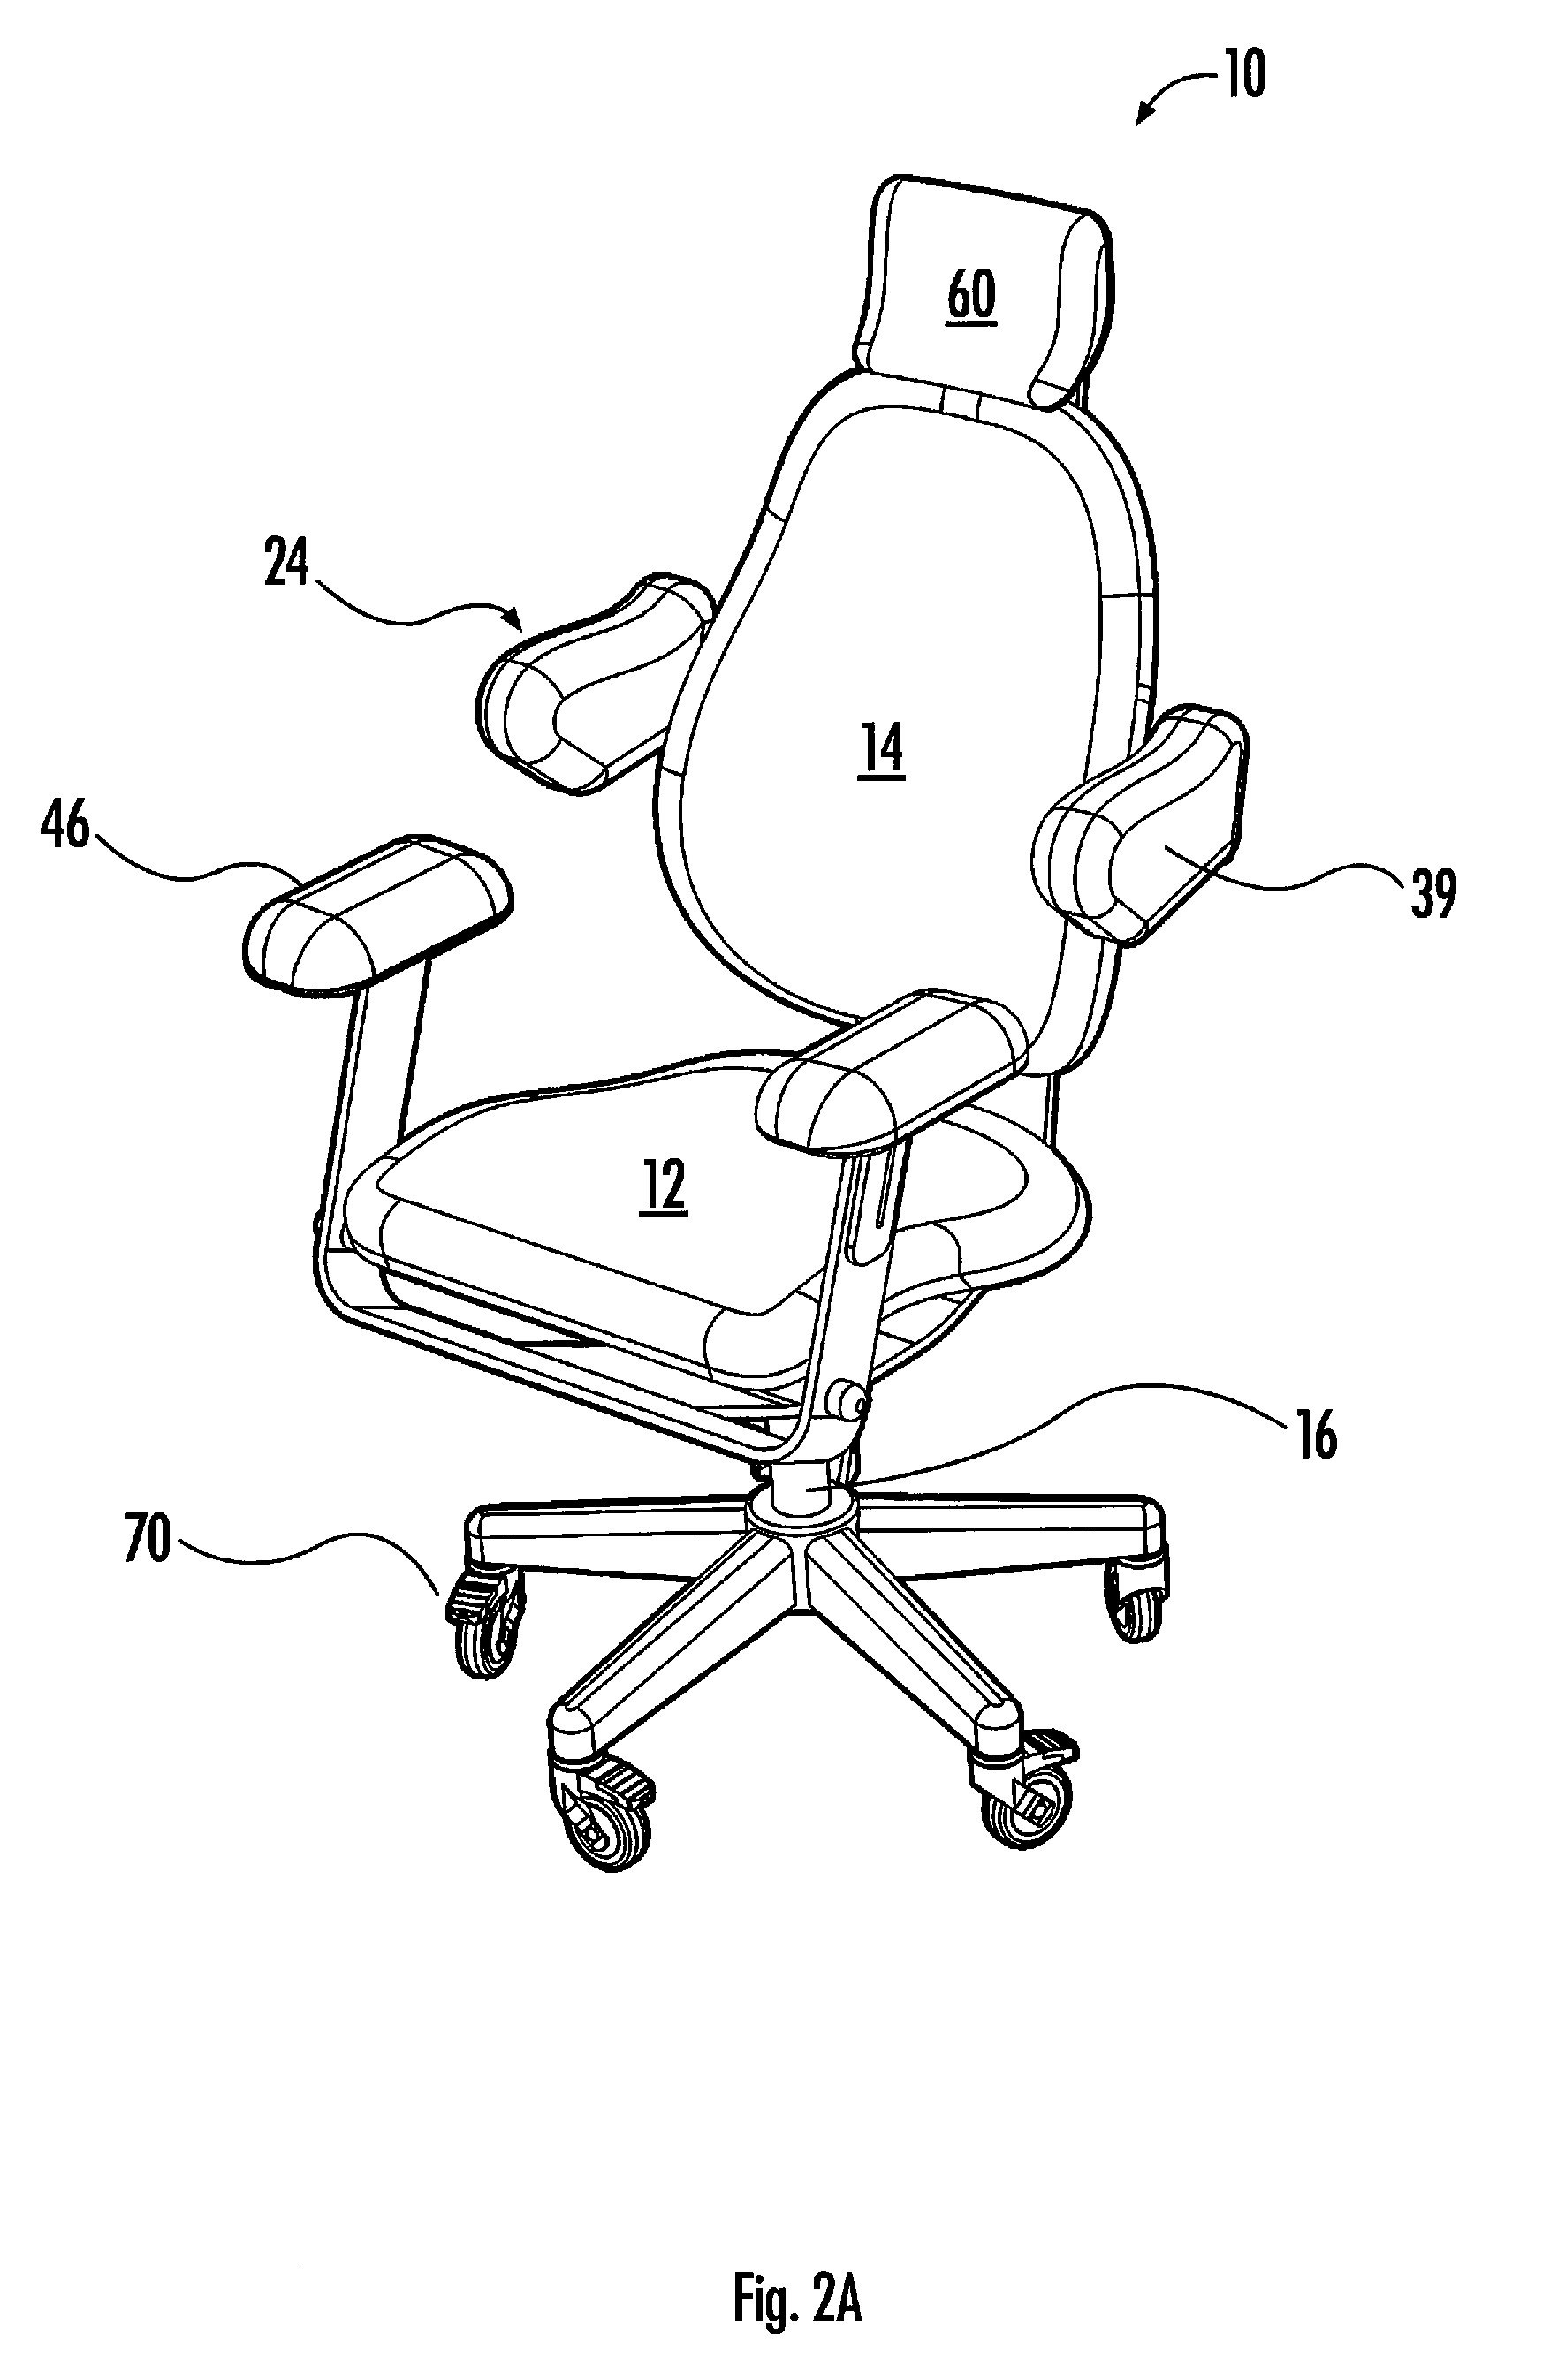 "Apparatus and Method For Spinal And/or Neck Decompression"